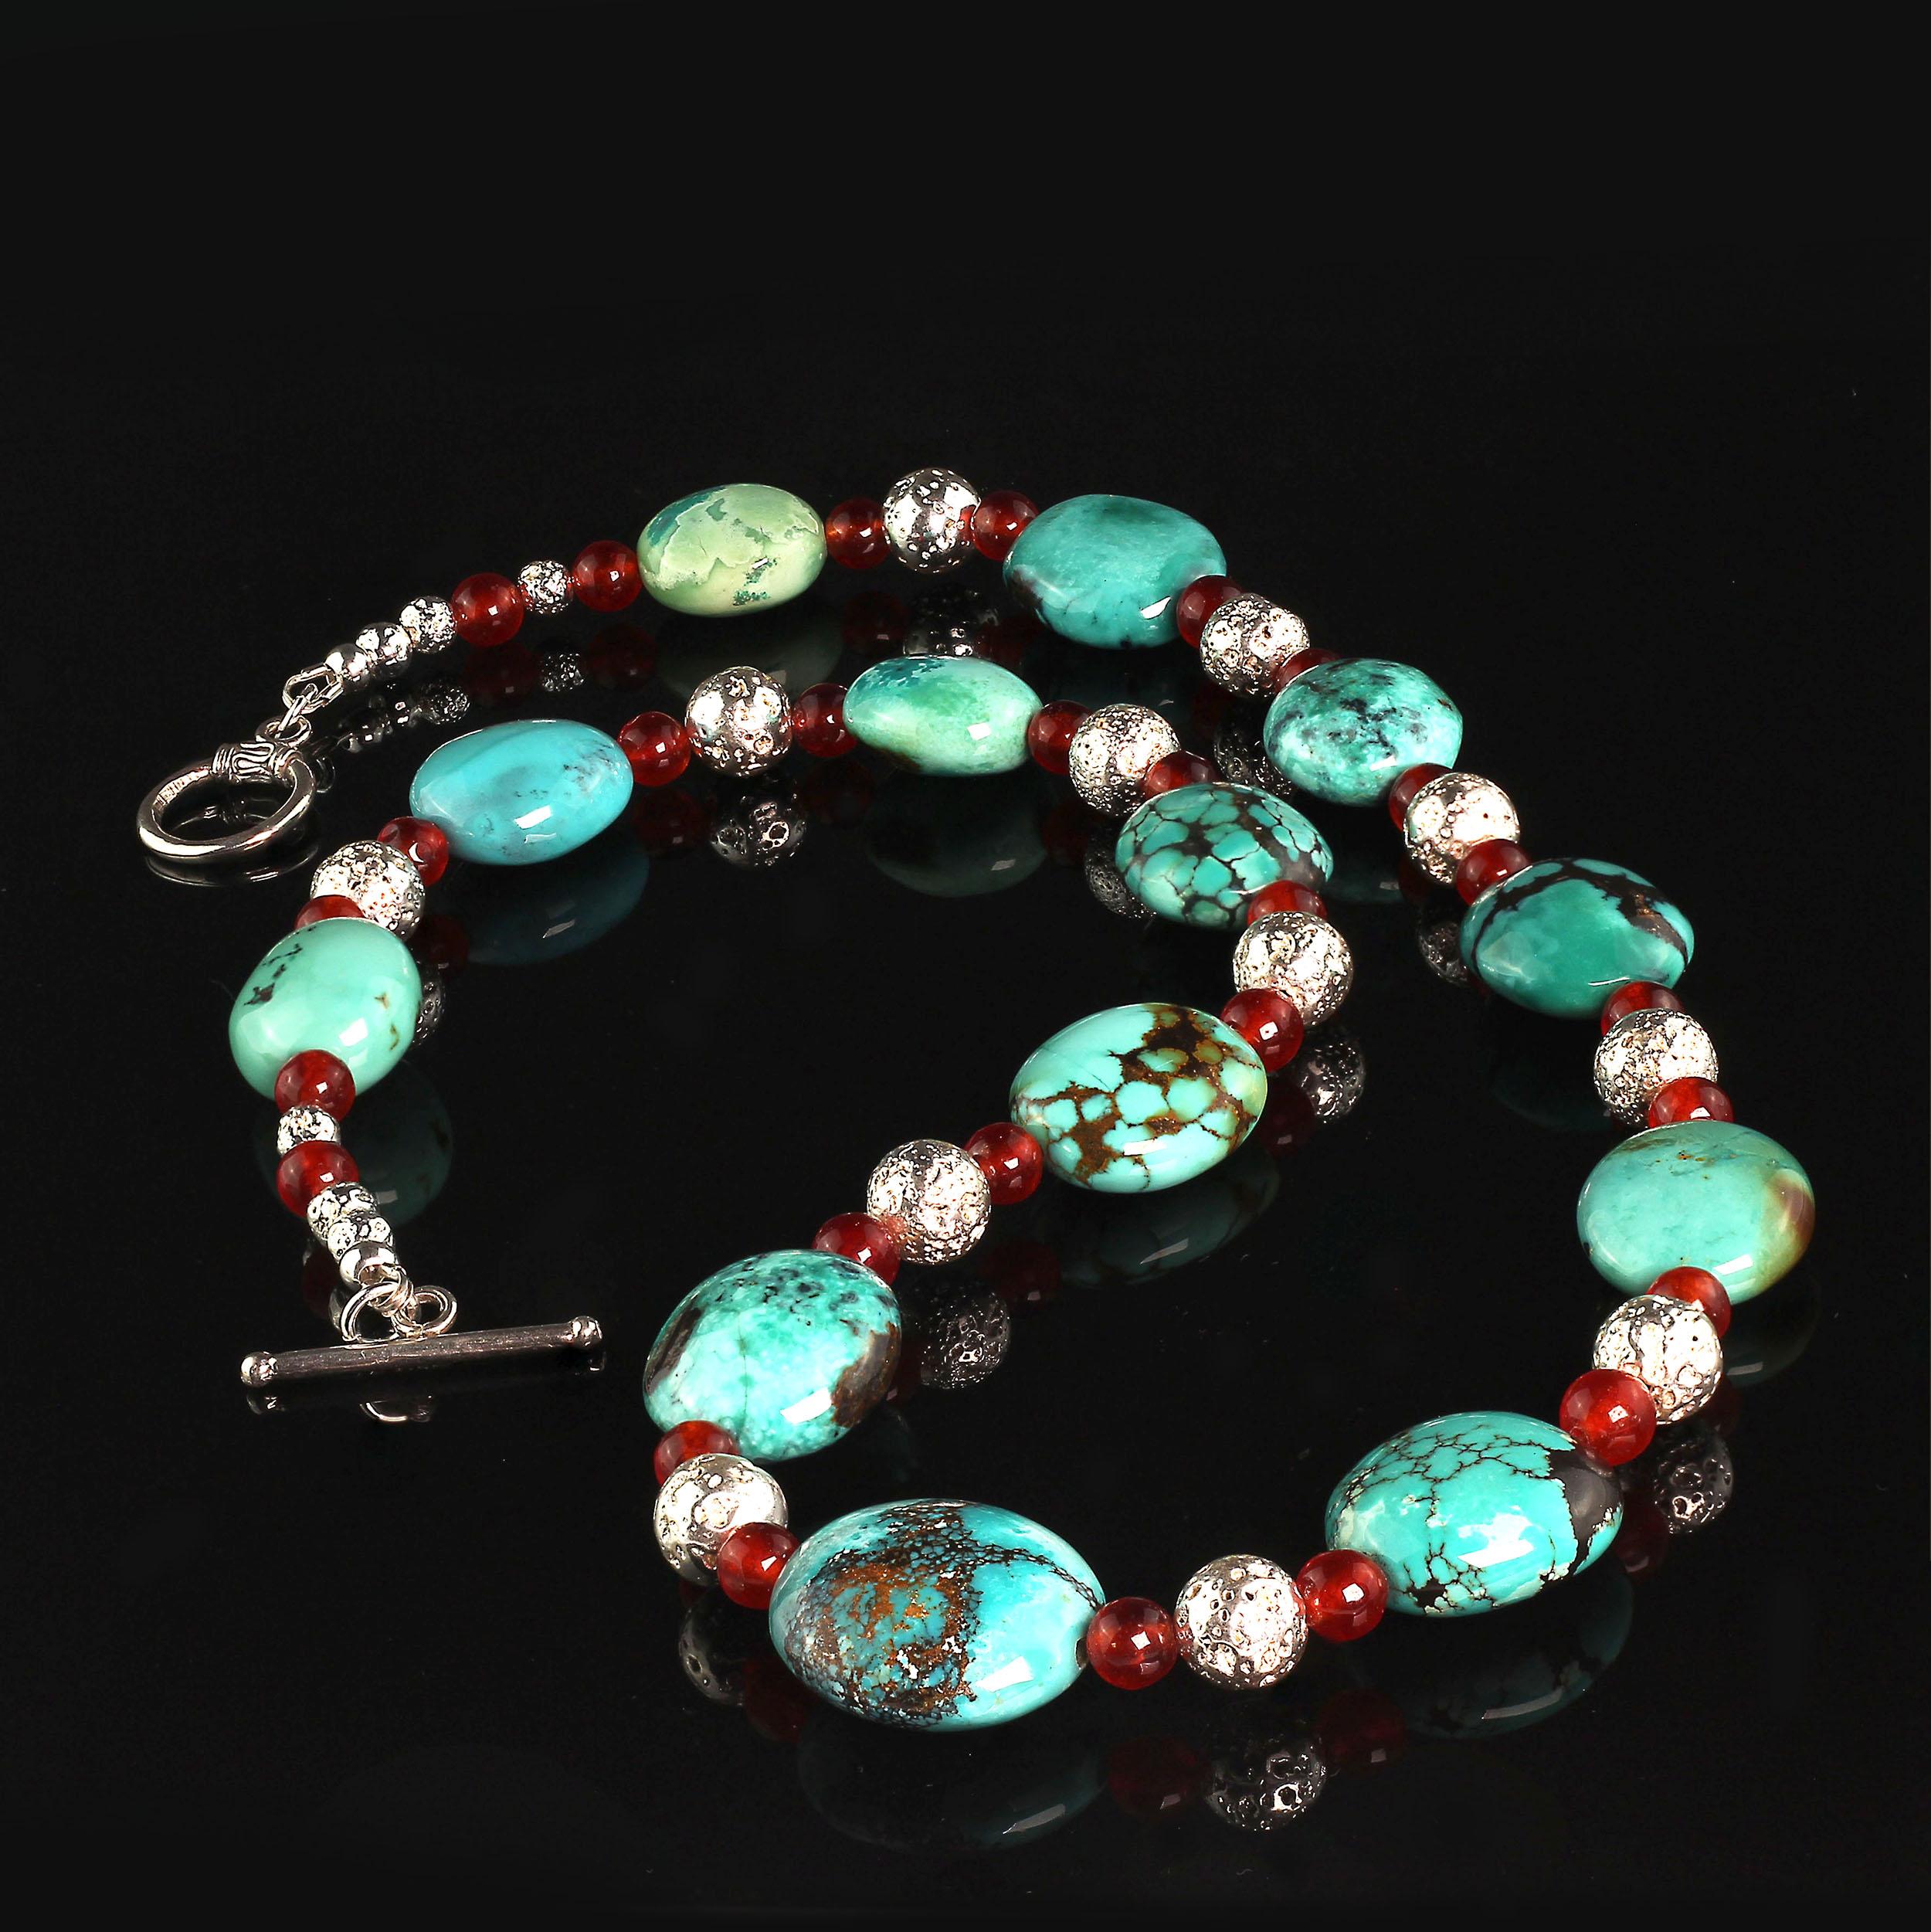 Southwest Influence necklace of graduated Turquoise matrix nuggets alternating with transparent Carnelian and Silver lava rock. This highly polished Turquoise graduates from 18 X 15 MM to 21 X 19 MM. The round Carnelian is 6 MM. And the Silver lava